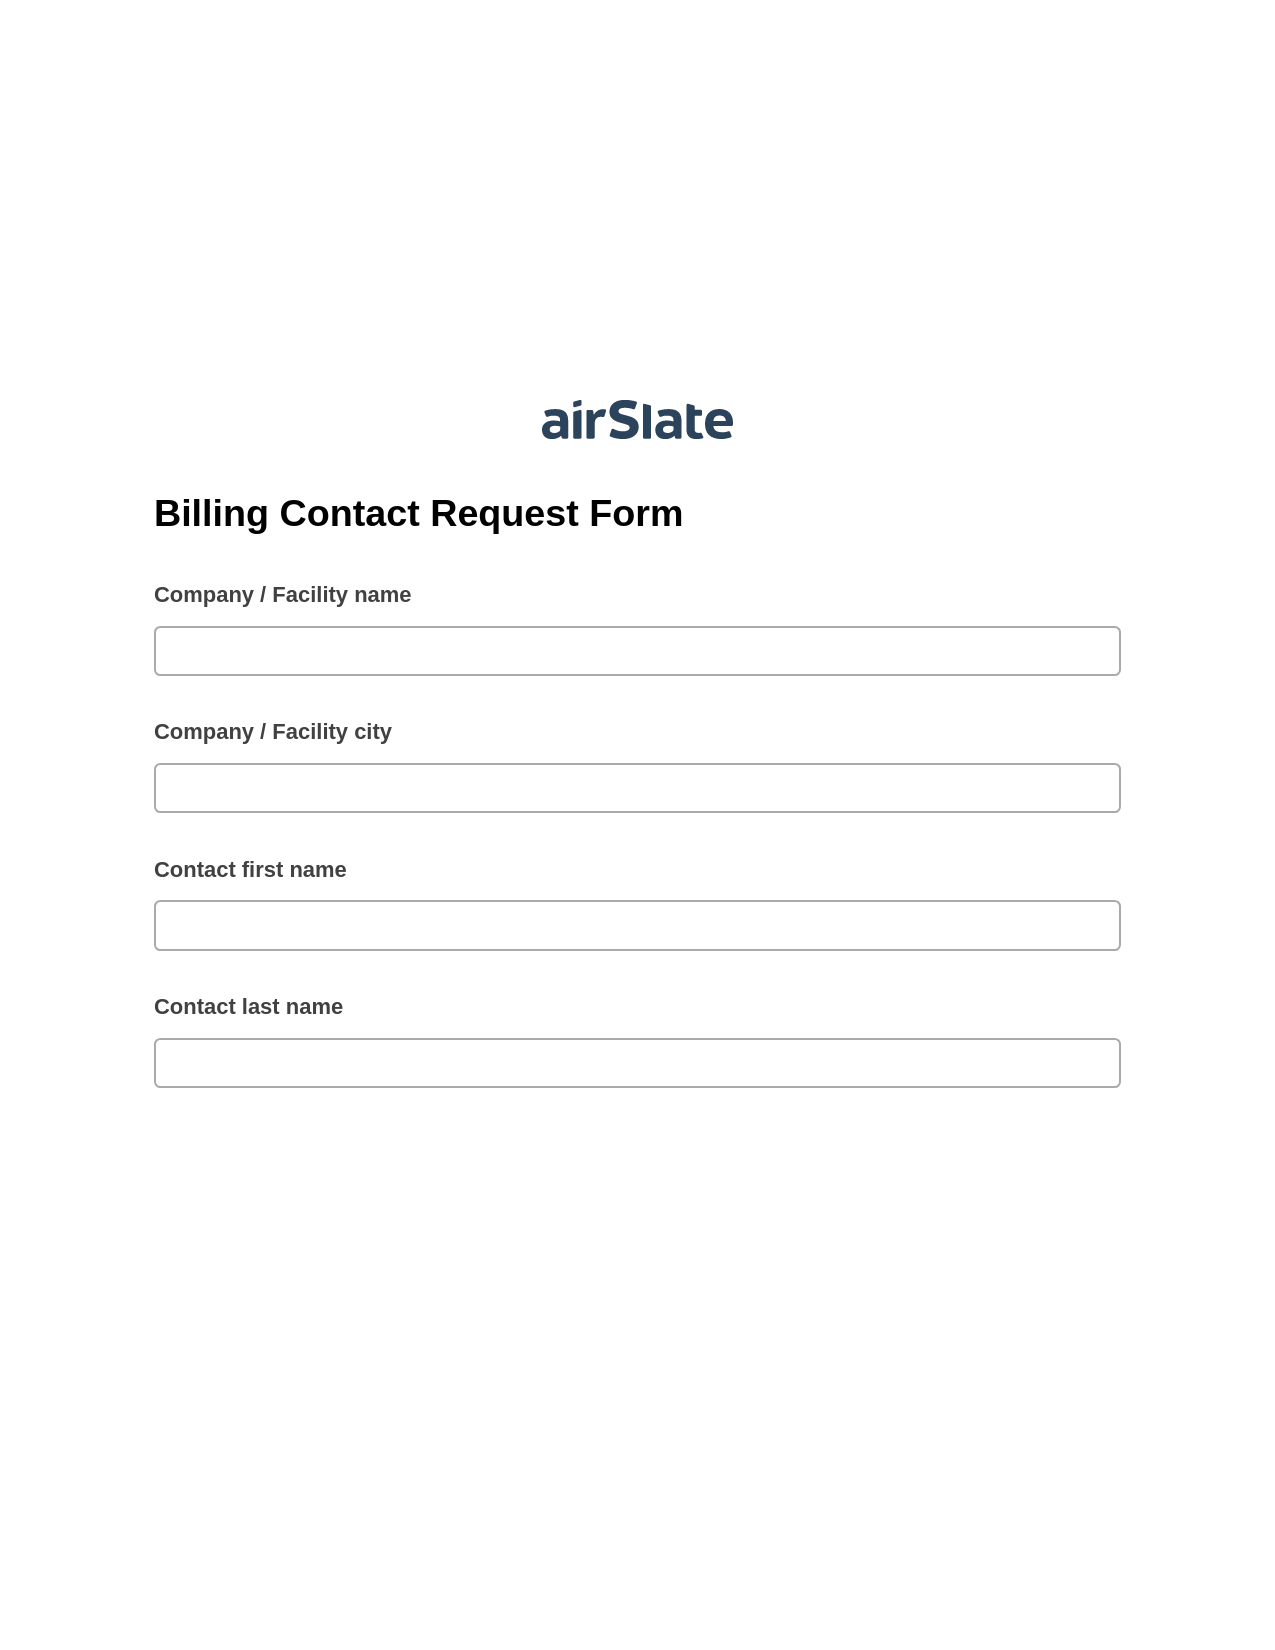 Billing Contact Request Form Pre-fill Dropdown from Airtable, Set Signature Type Bot, Export to Excel 365 Bot